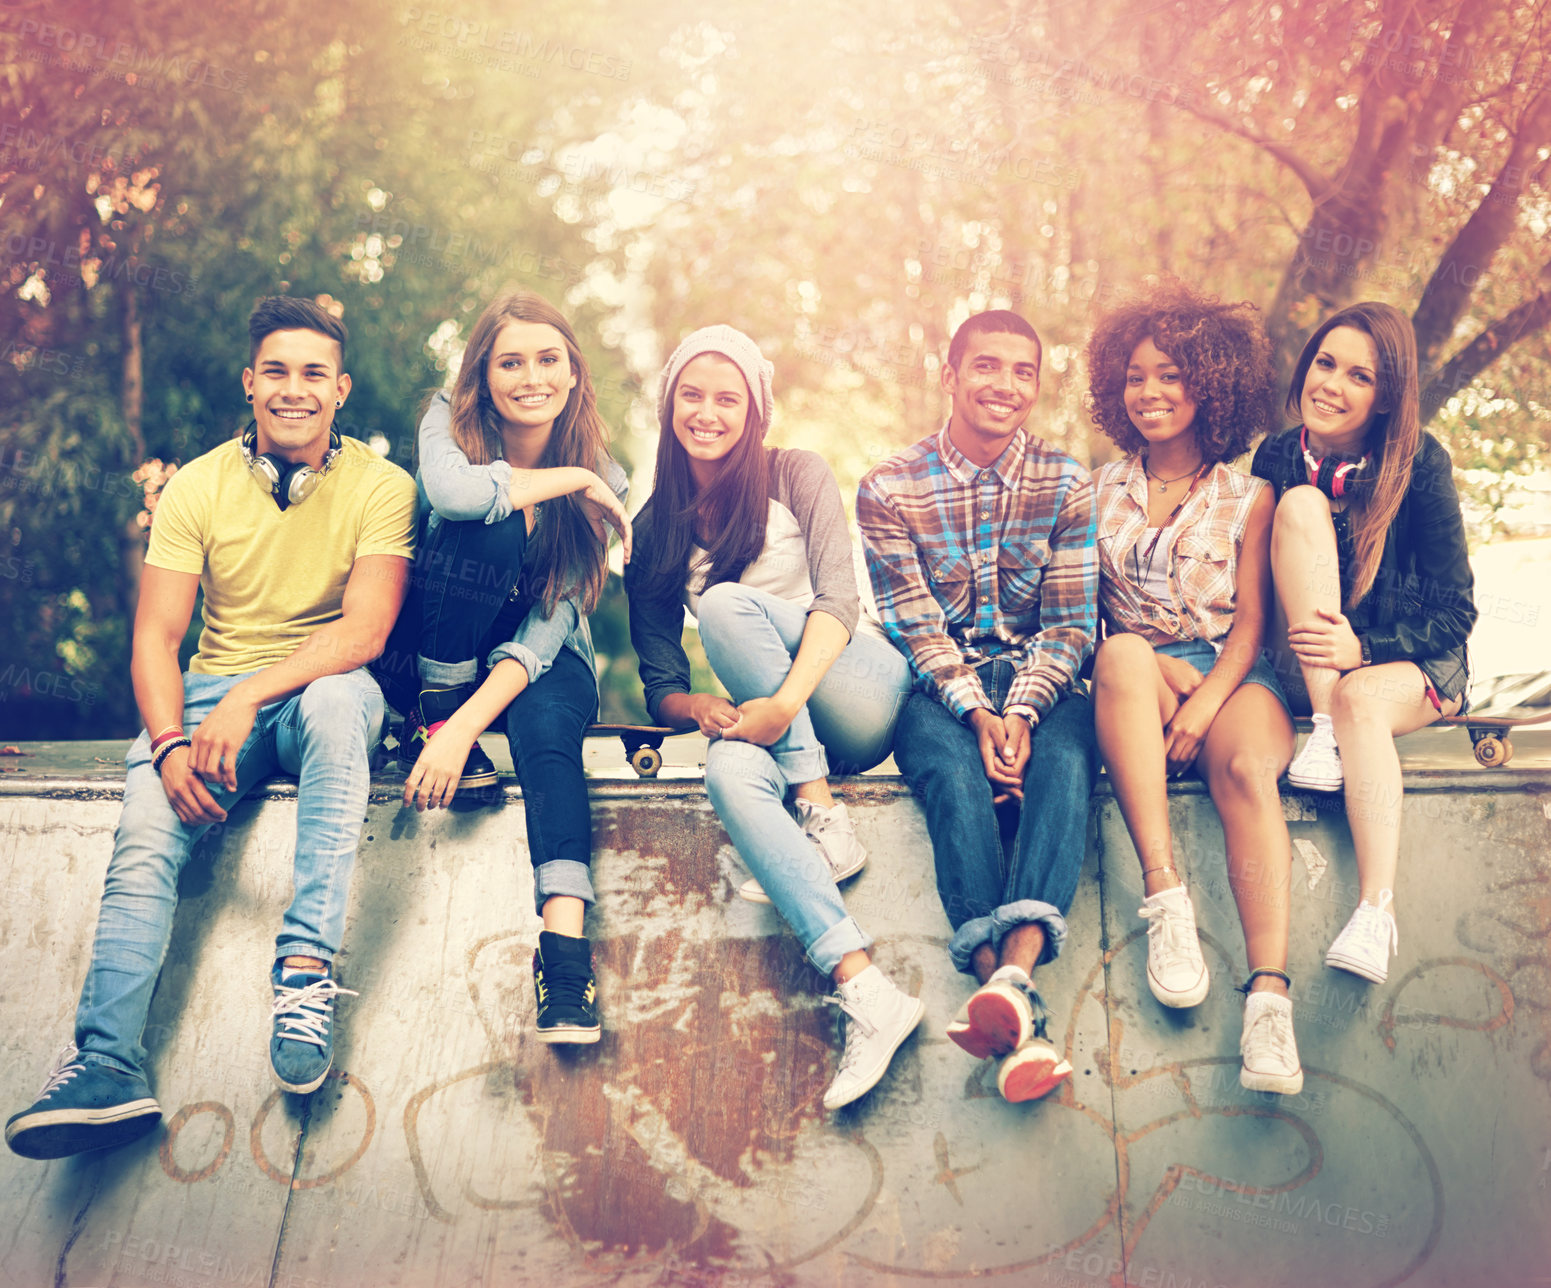 Buy stock photo Portrait of a group of friends hanging out together in an urban setting